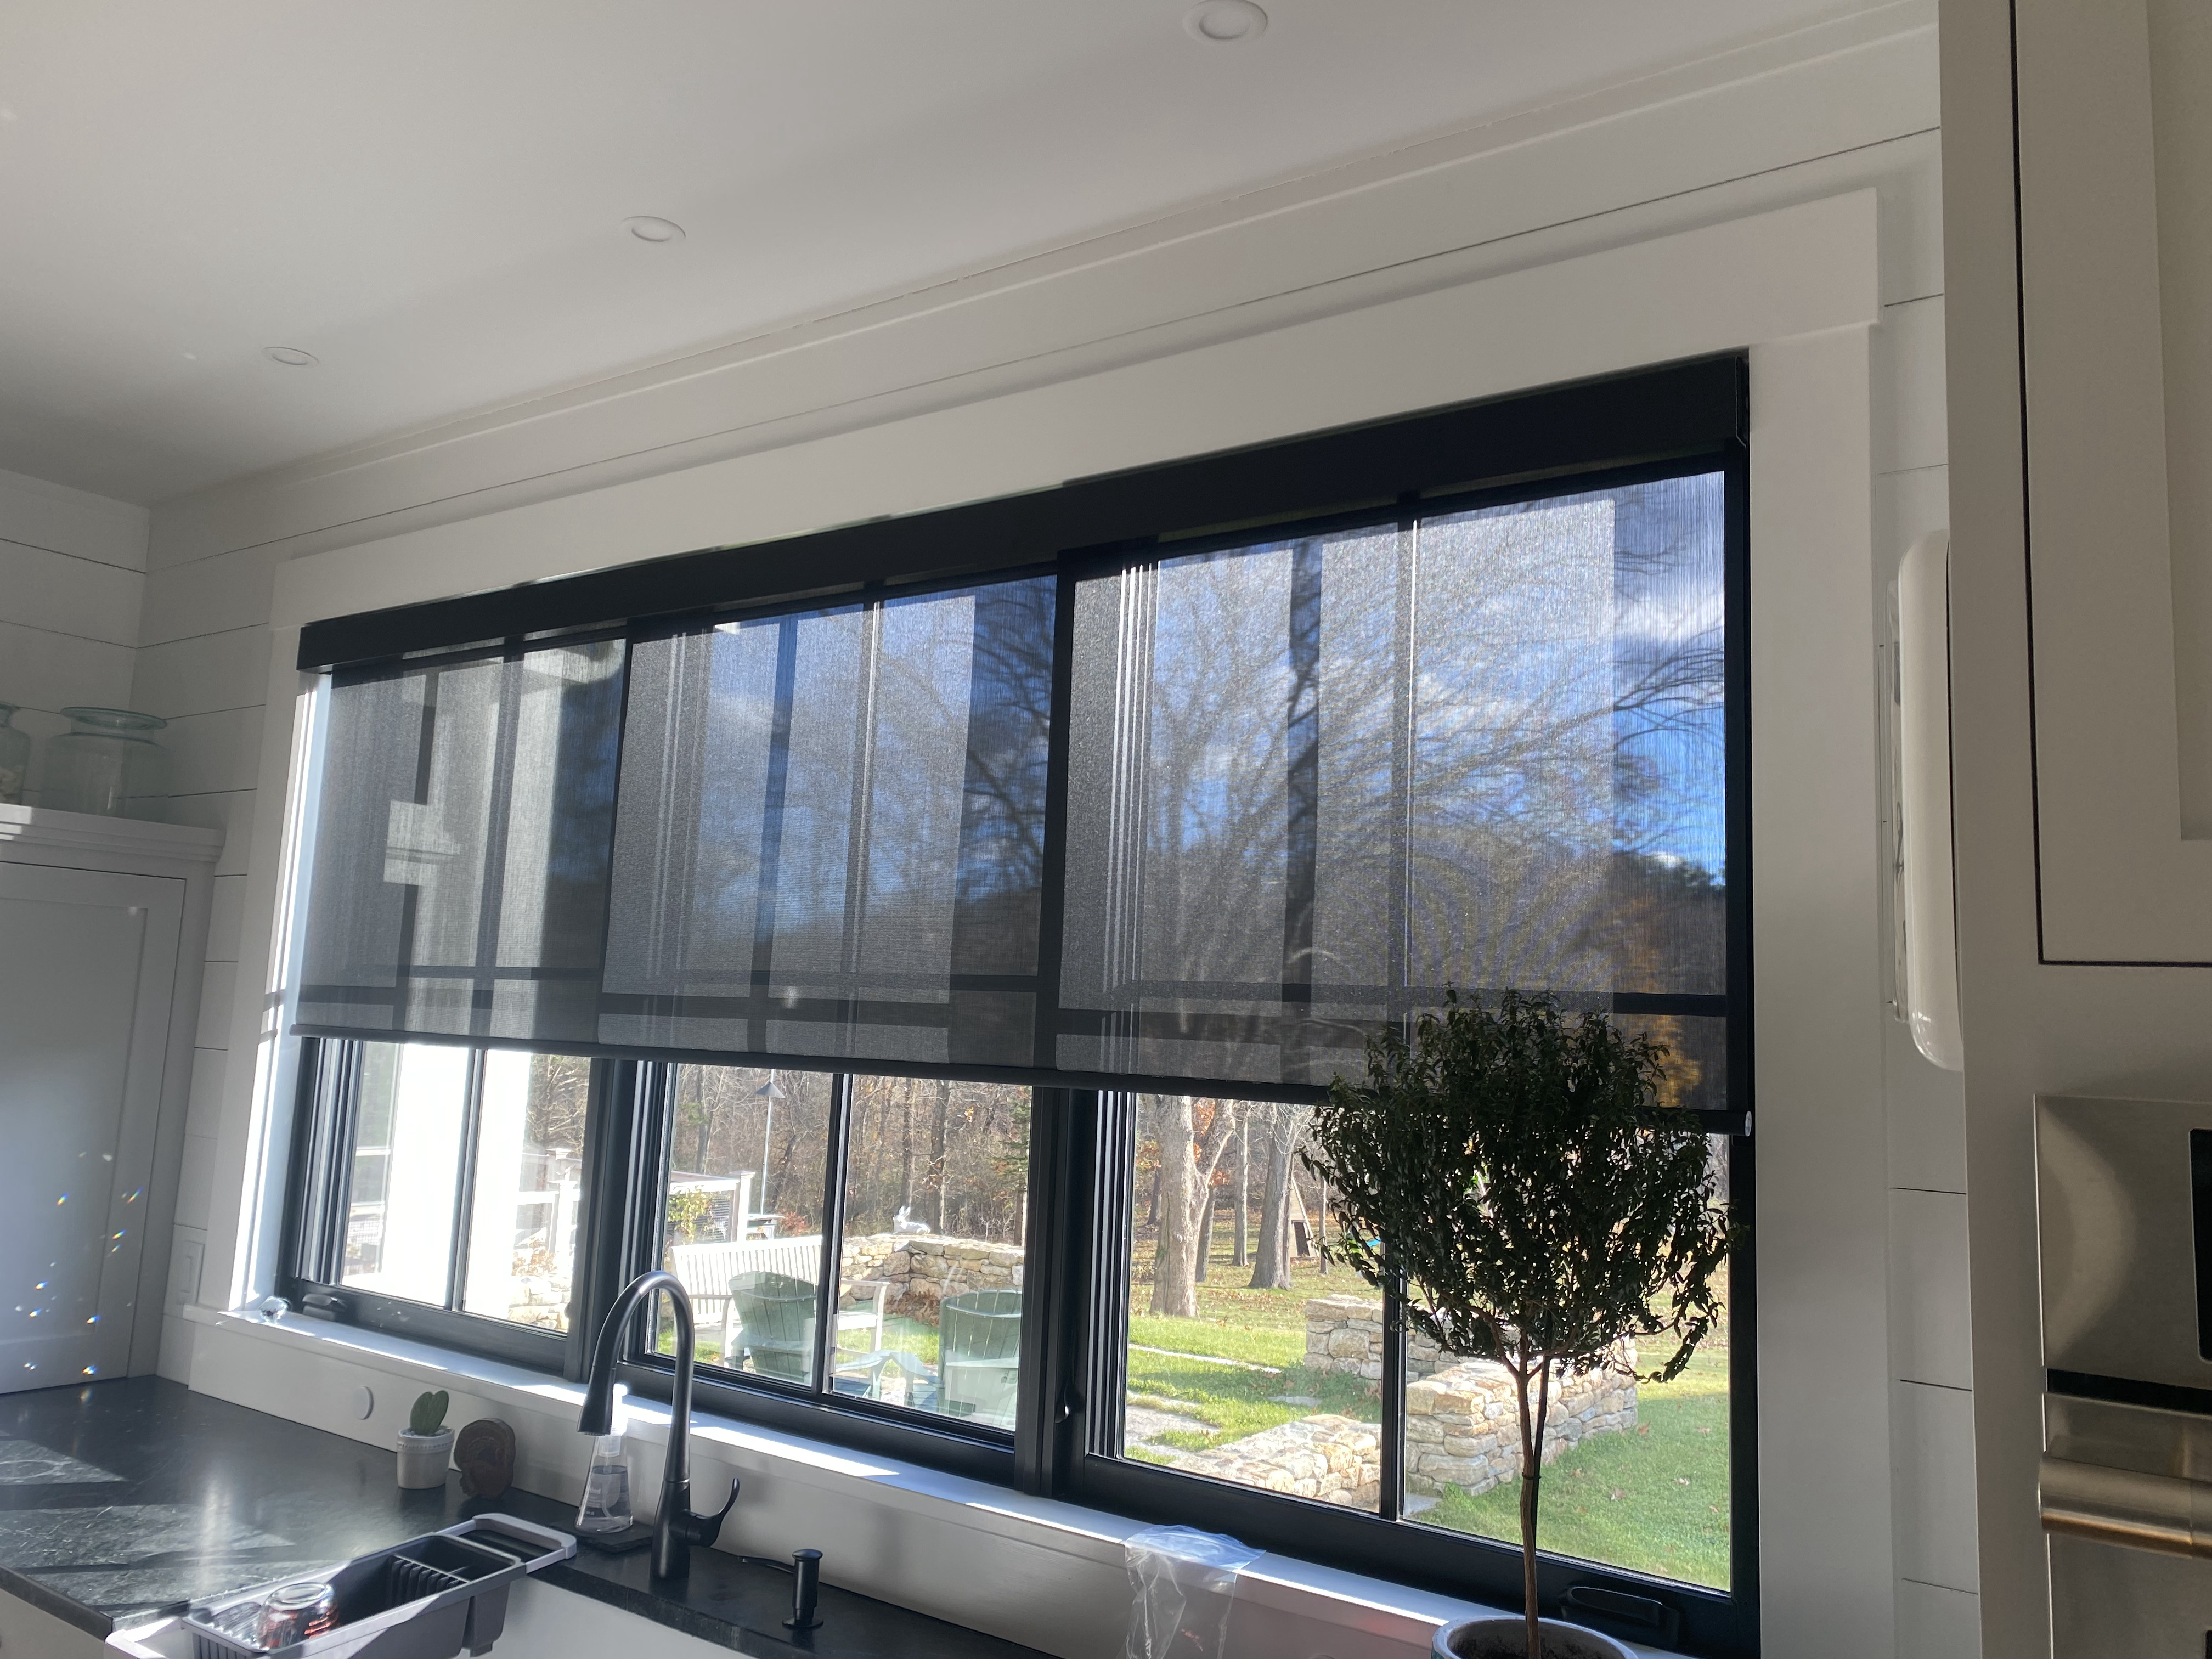 As the sun gets brighter our solar shades will cut down the glare